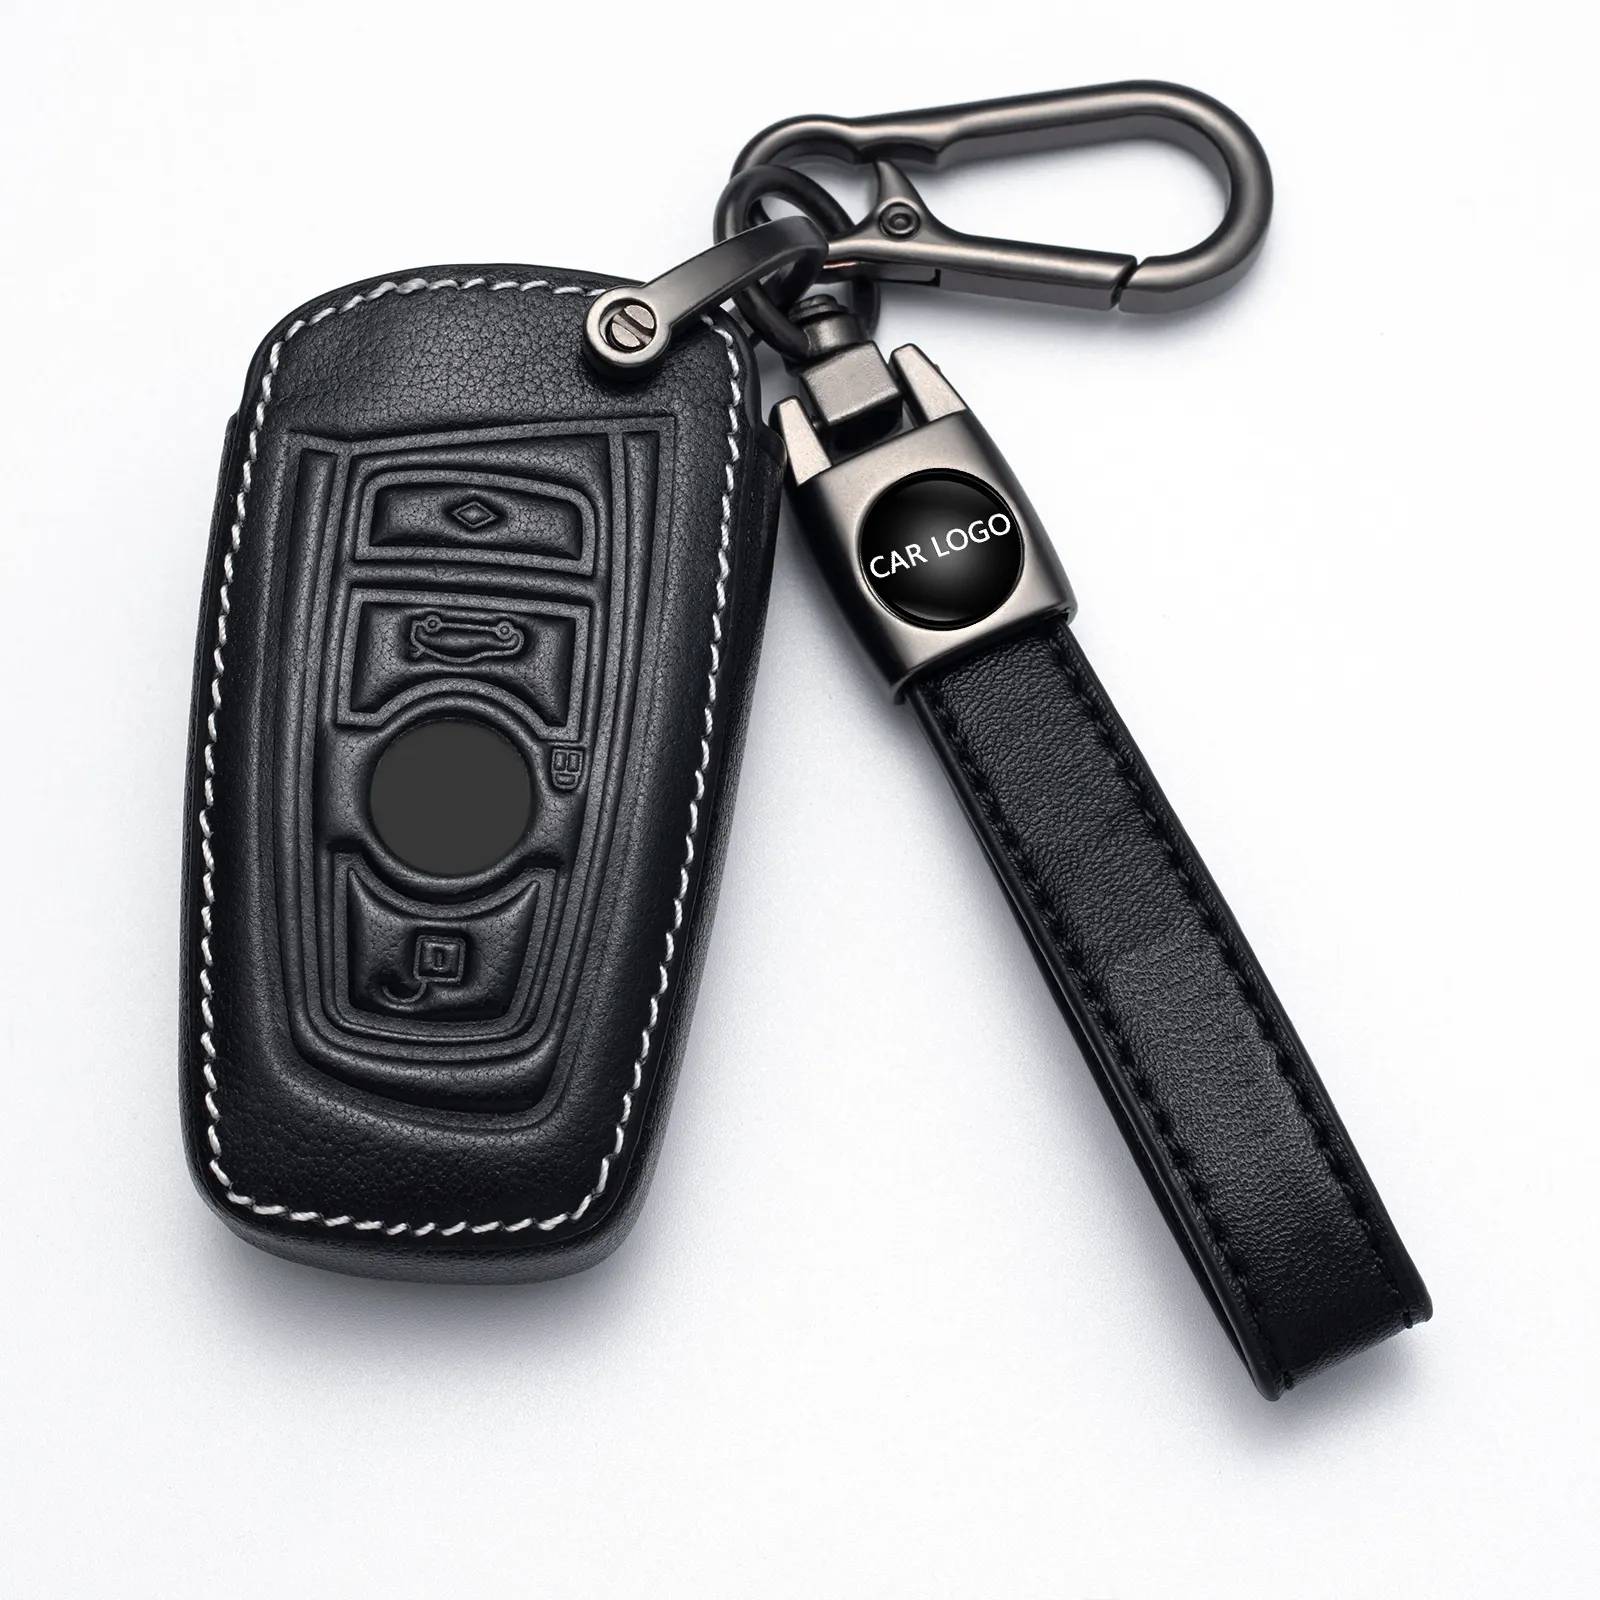 Leather Car key cove case Suit for Mercedes Benz Honda Ford Nissan BMW MAZDA LINCOLN key for holder key fob cover with logo